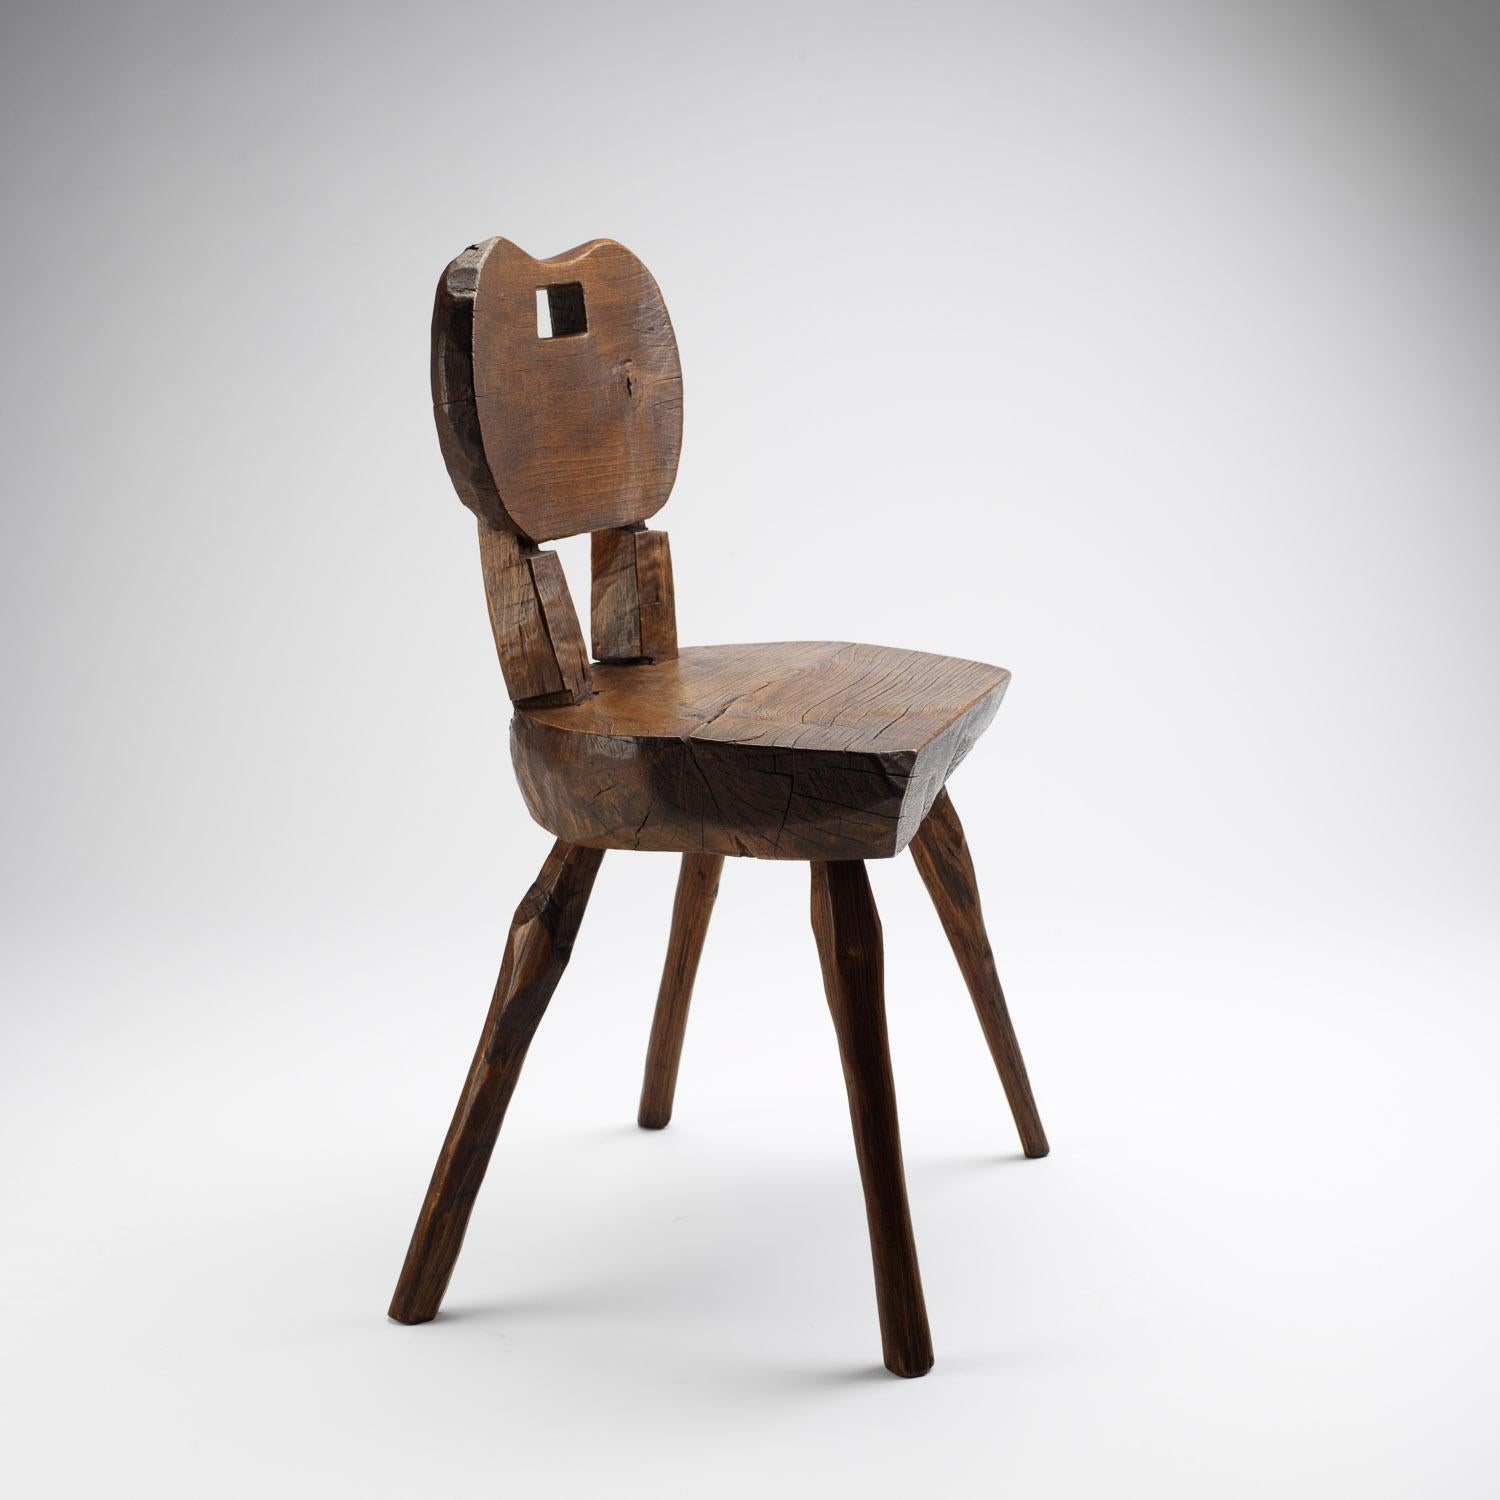 A primitive handmade Alpine chair in solid ash. Strong, naive construction with a rounded back and handle, France, early 1900s.